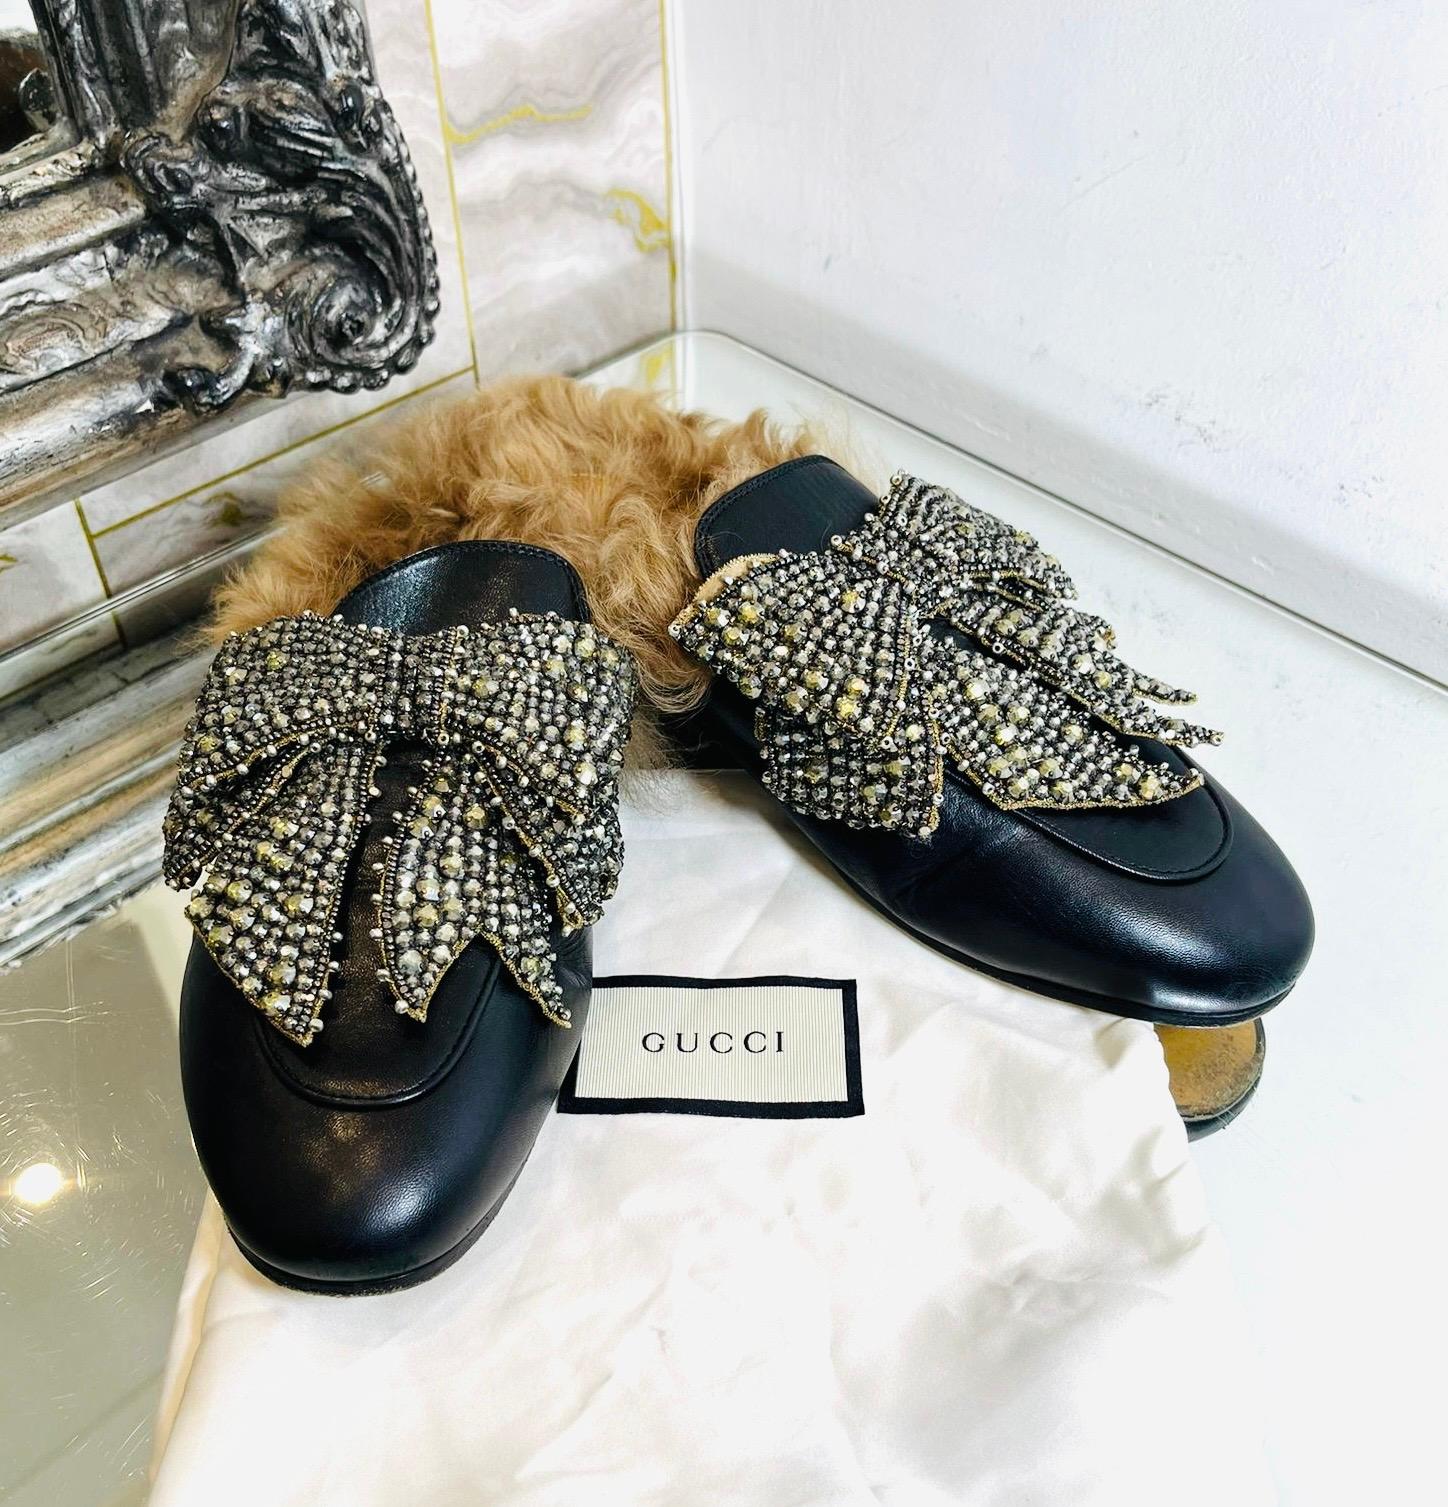 Gucci Princetown Crystal Bow & Shearling-Lined Leather Mules

Black mules designed with oversized bead and crystal embellished bow.

Featuring lamb shearling lining, round toe and leather soles and midsoles.

Rrp Approx. £1350

Size – 40

Condition